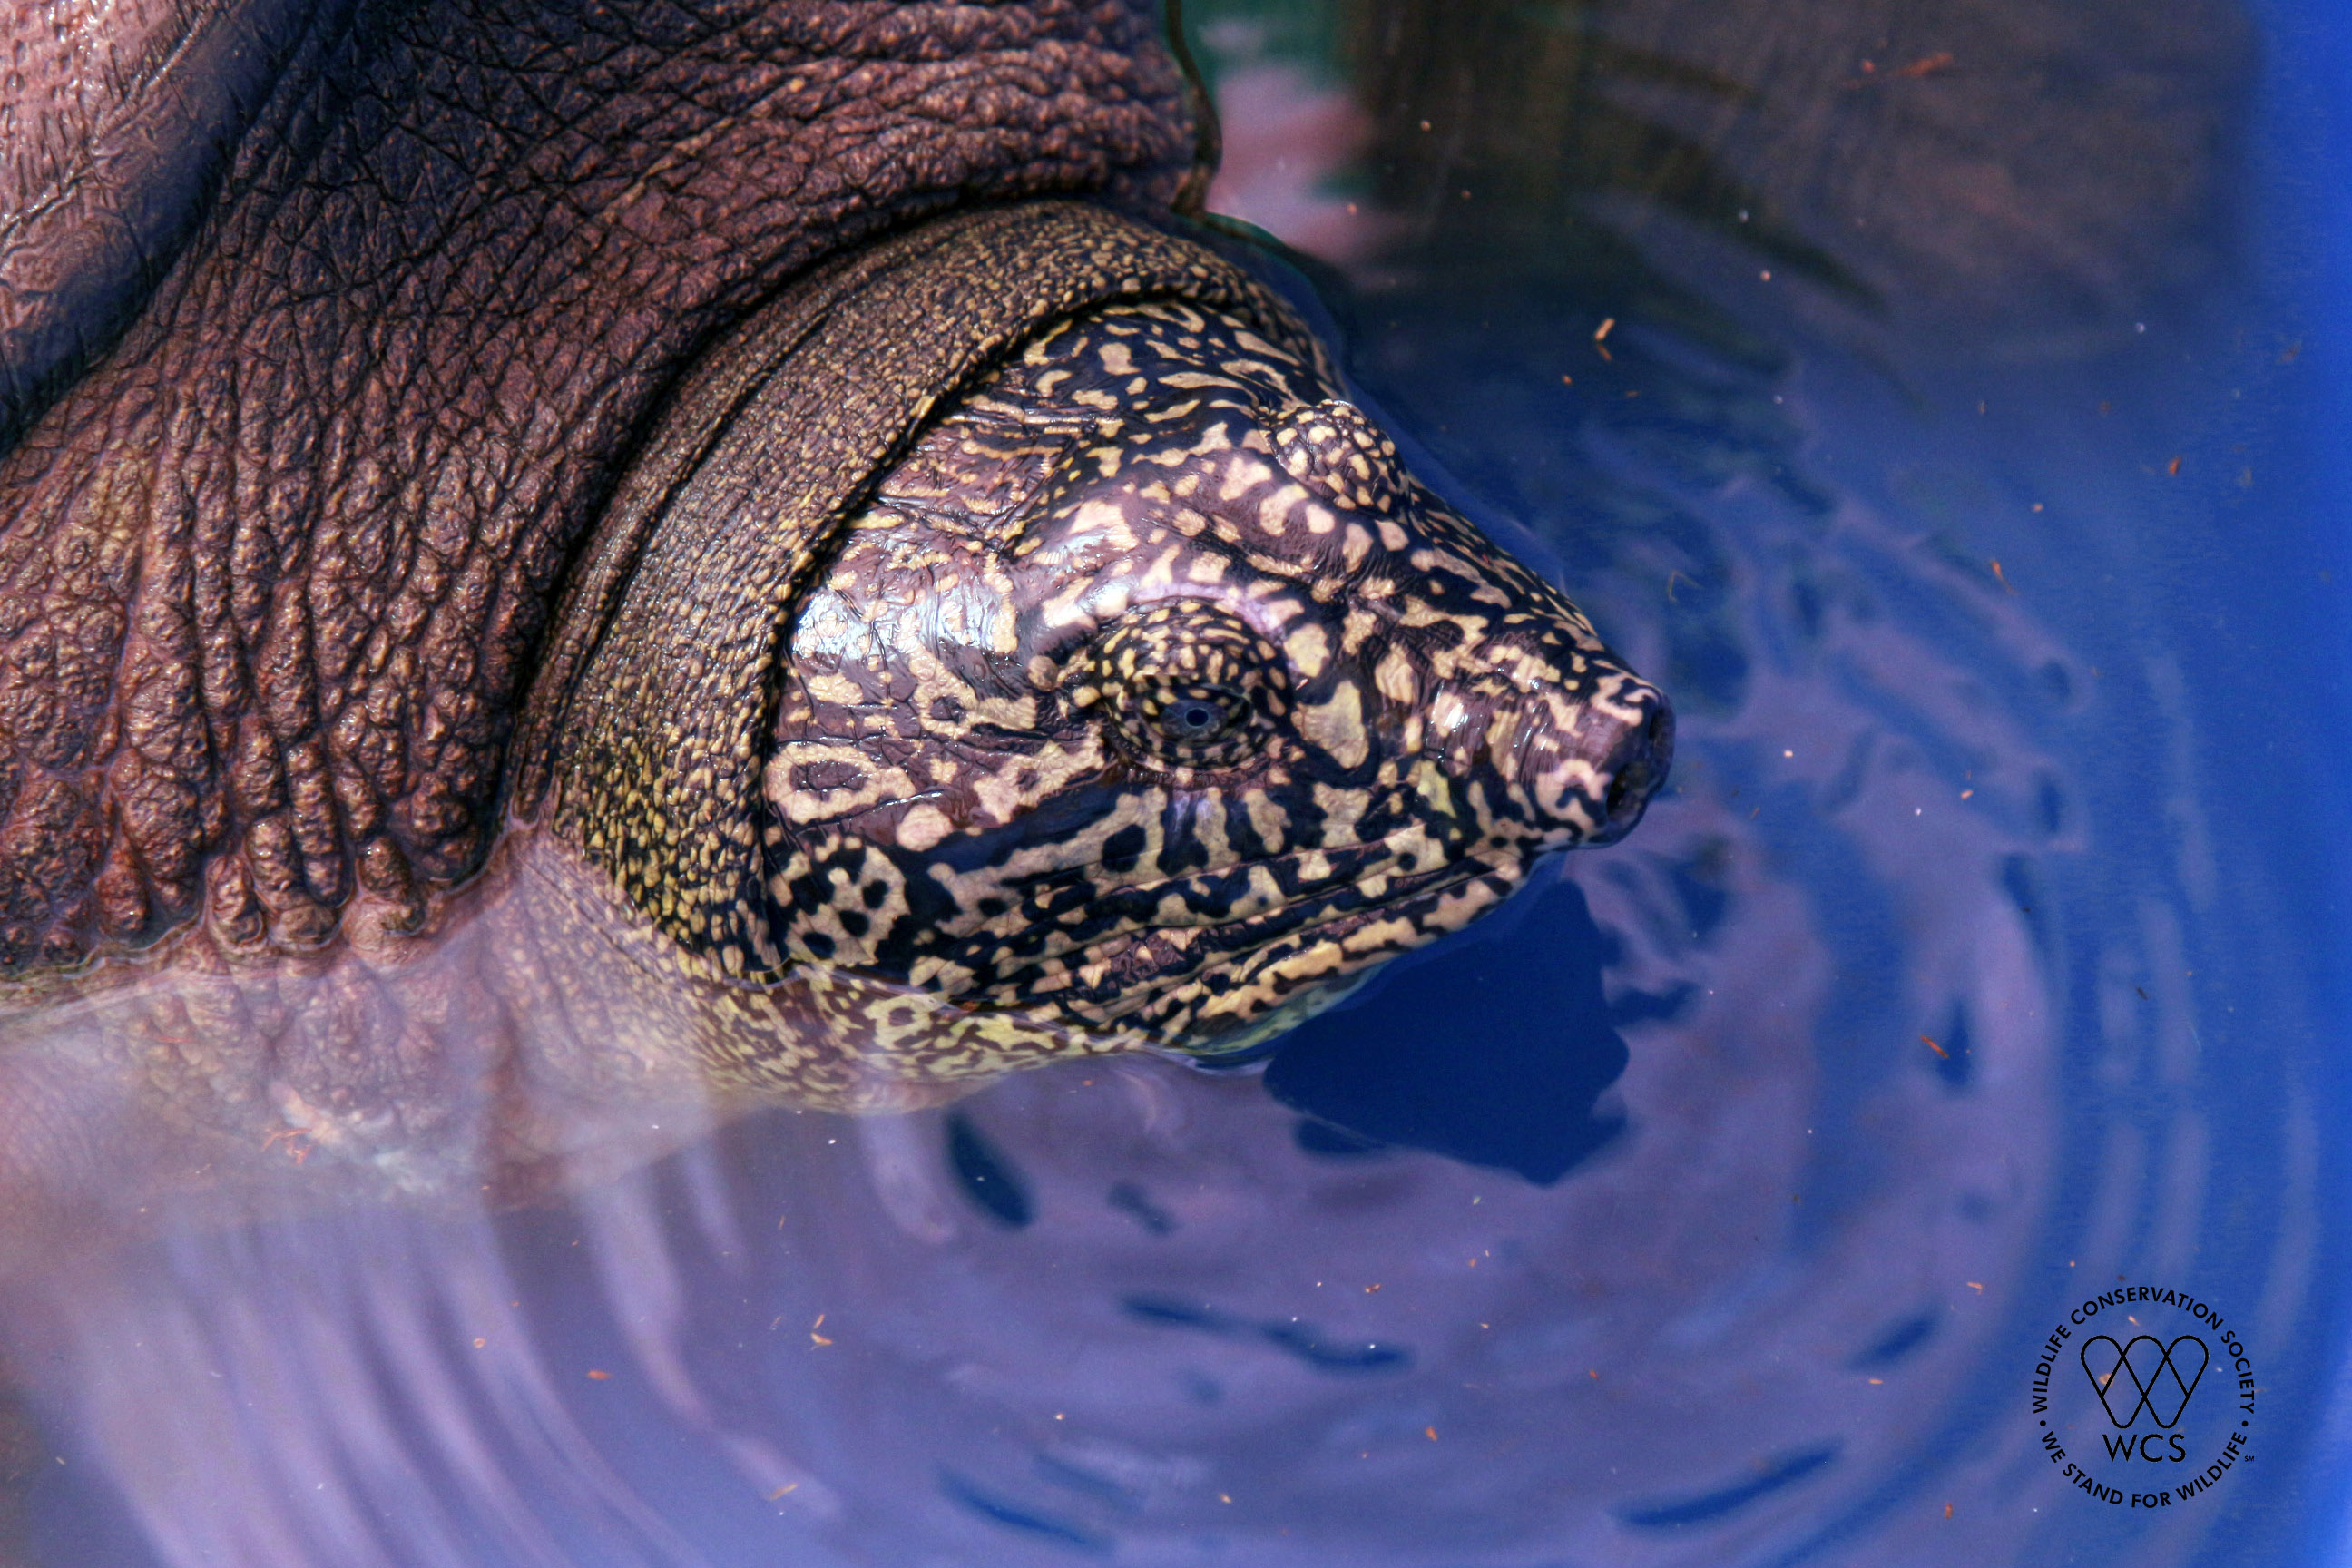 This close-up of the Rafetus swinhoei turtle shows its head and patterned skin.